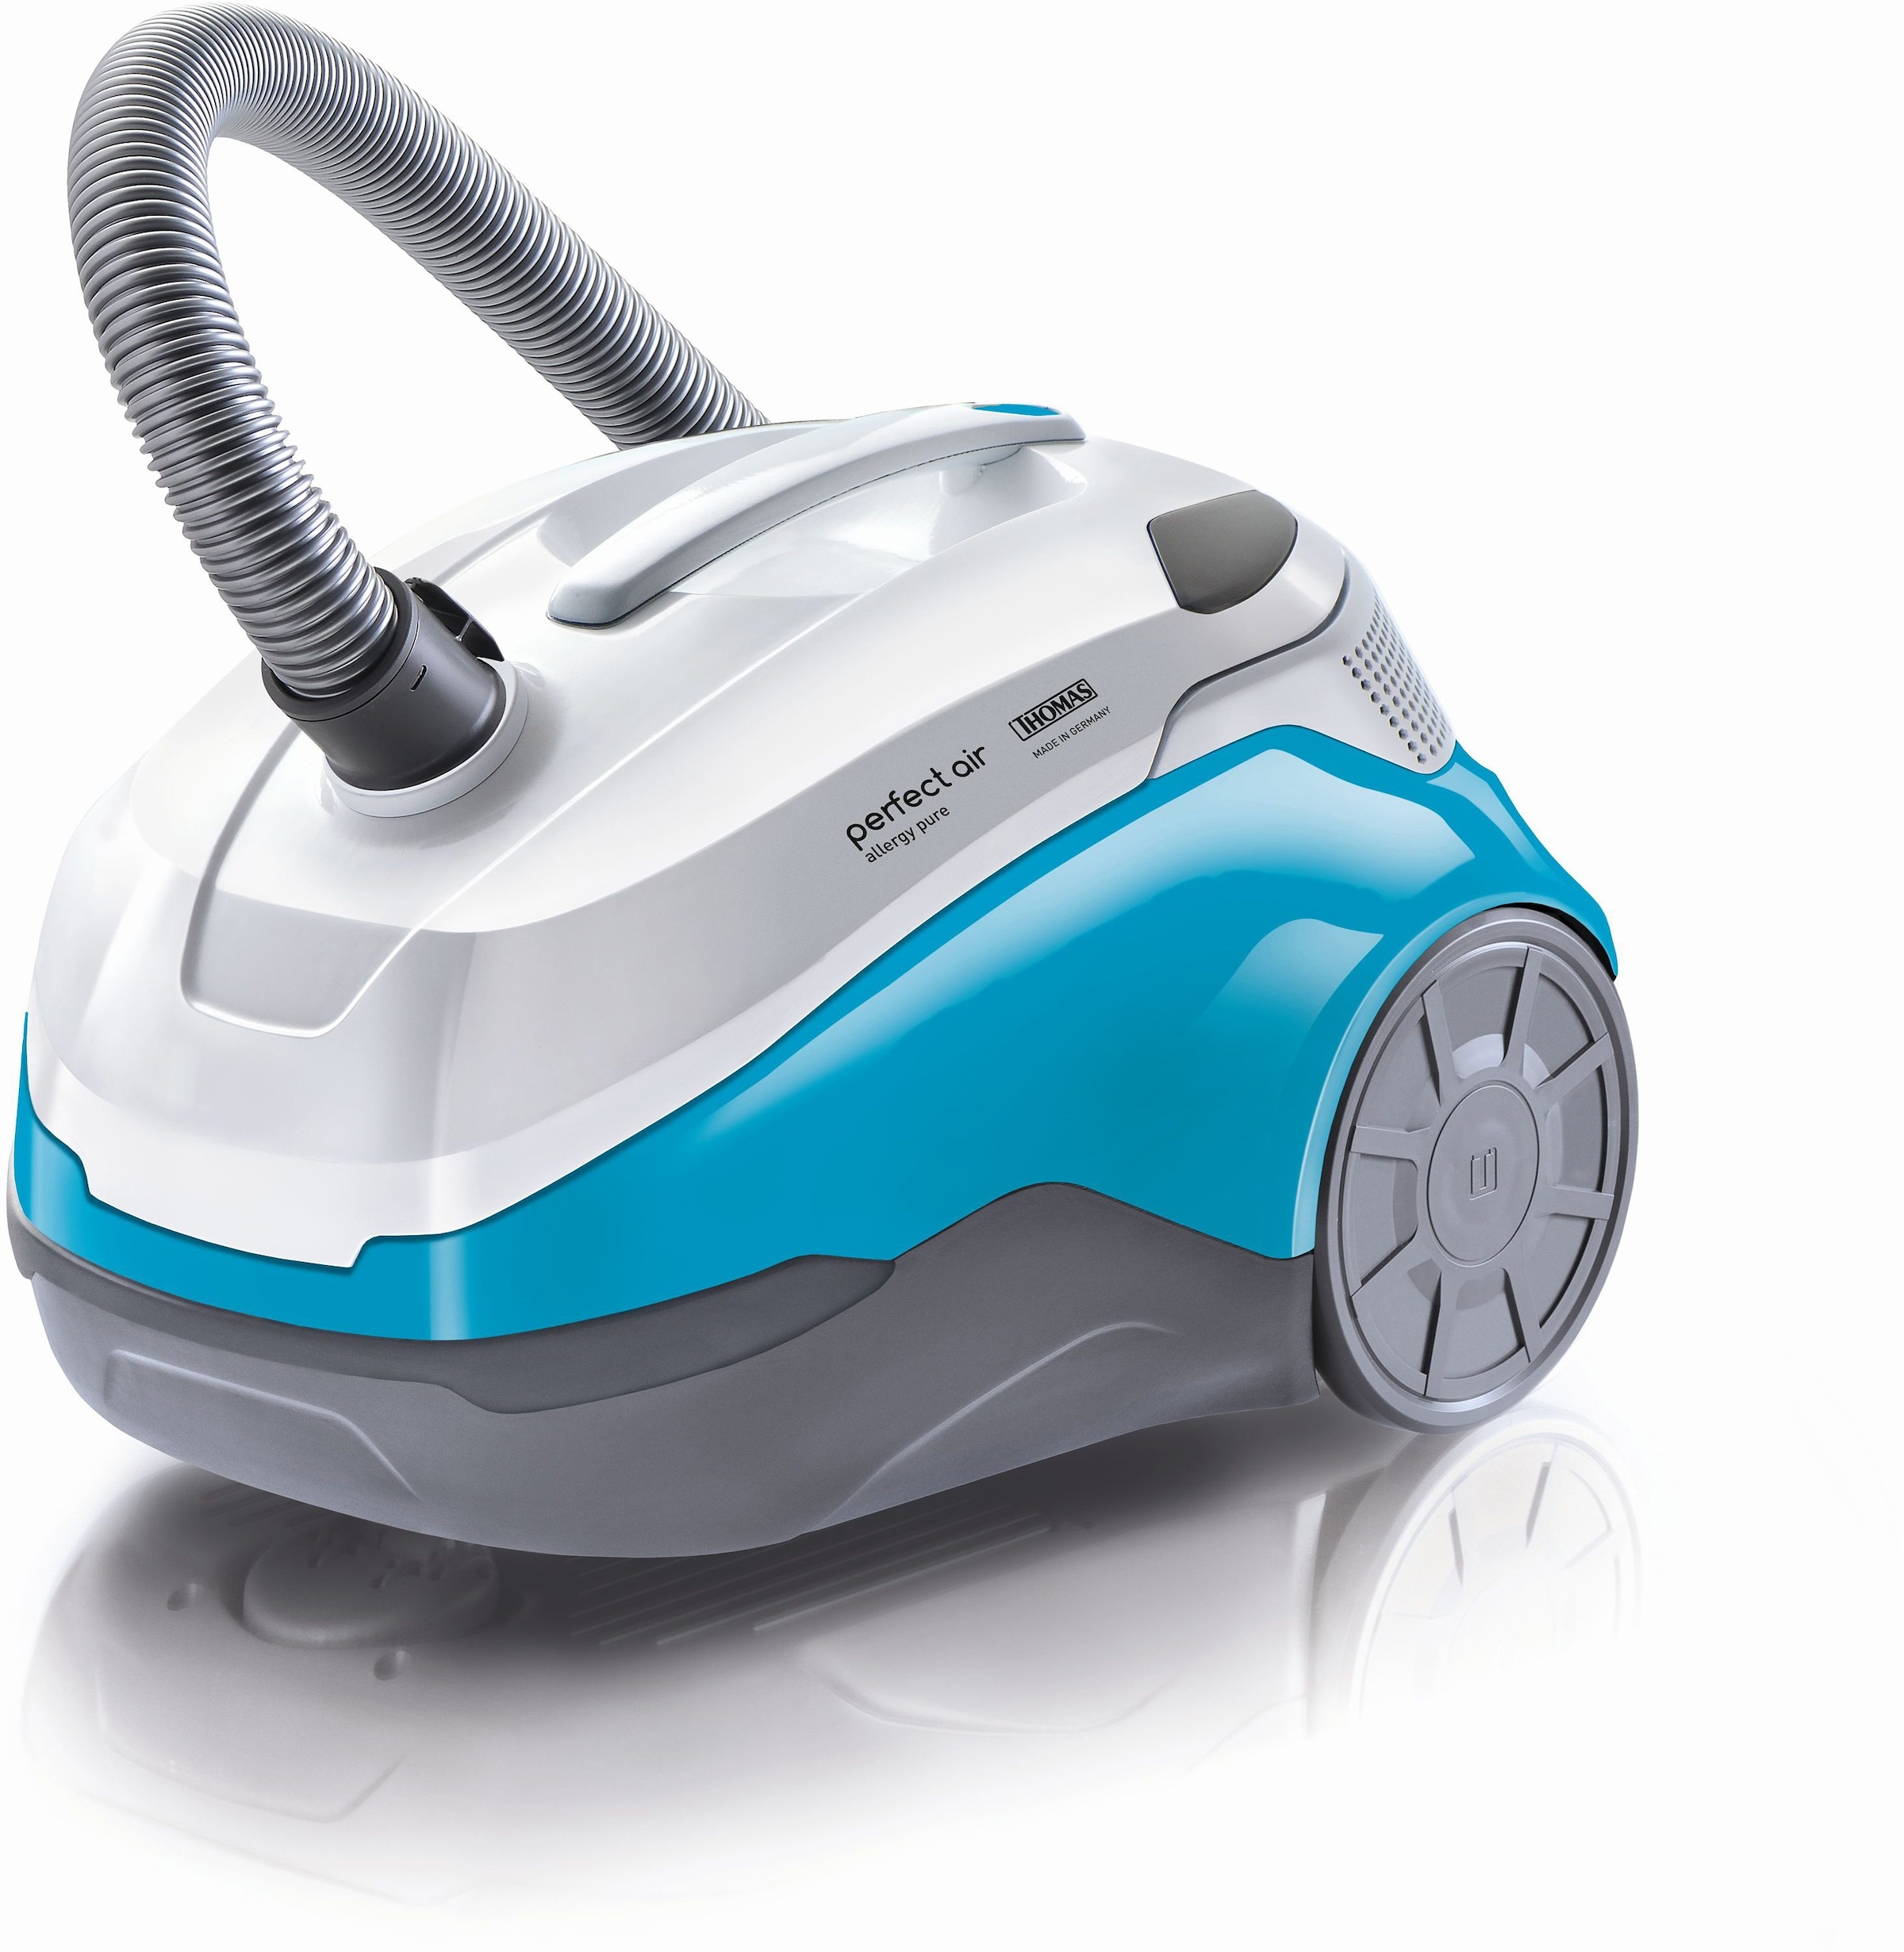 Wasserfiltersauger »perfect air allergy pure«, 1700 W, beutellos